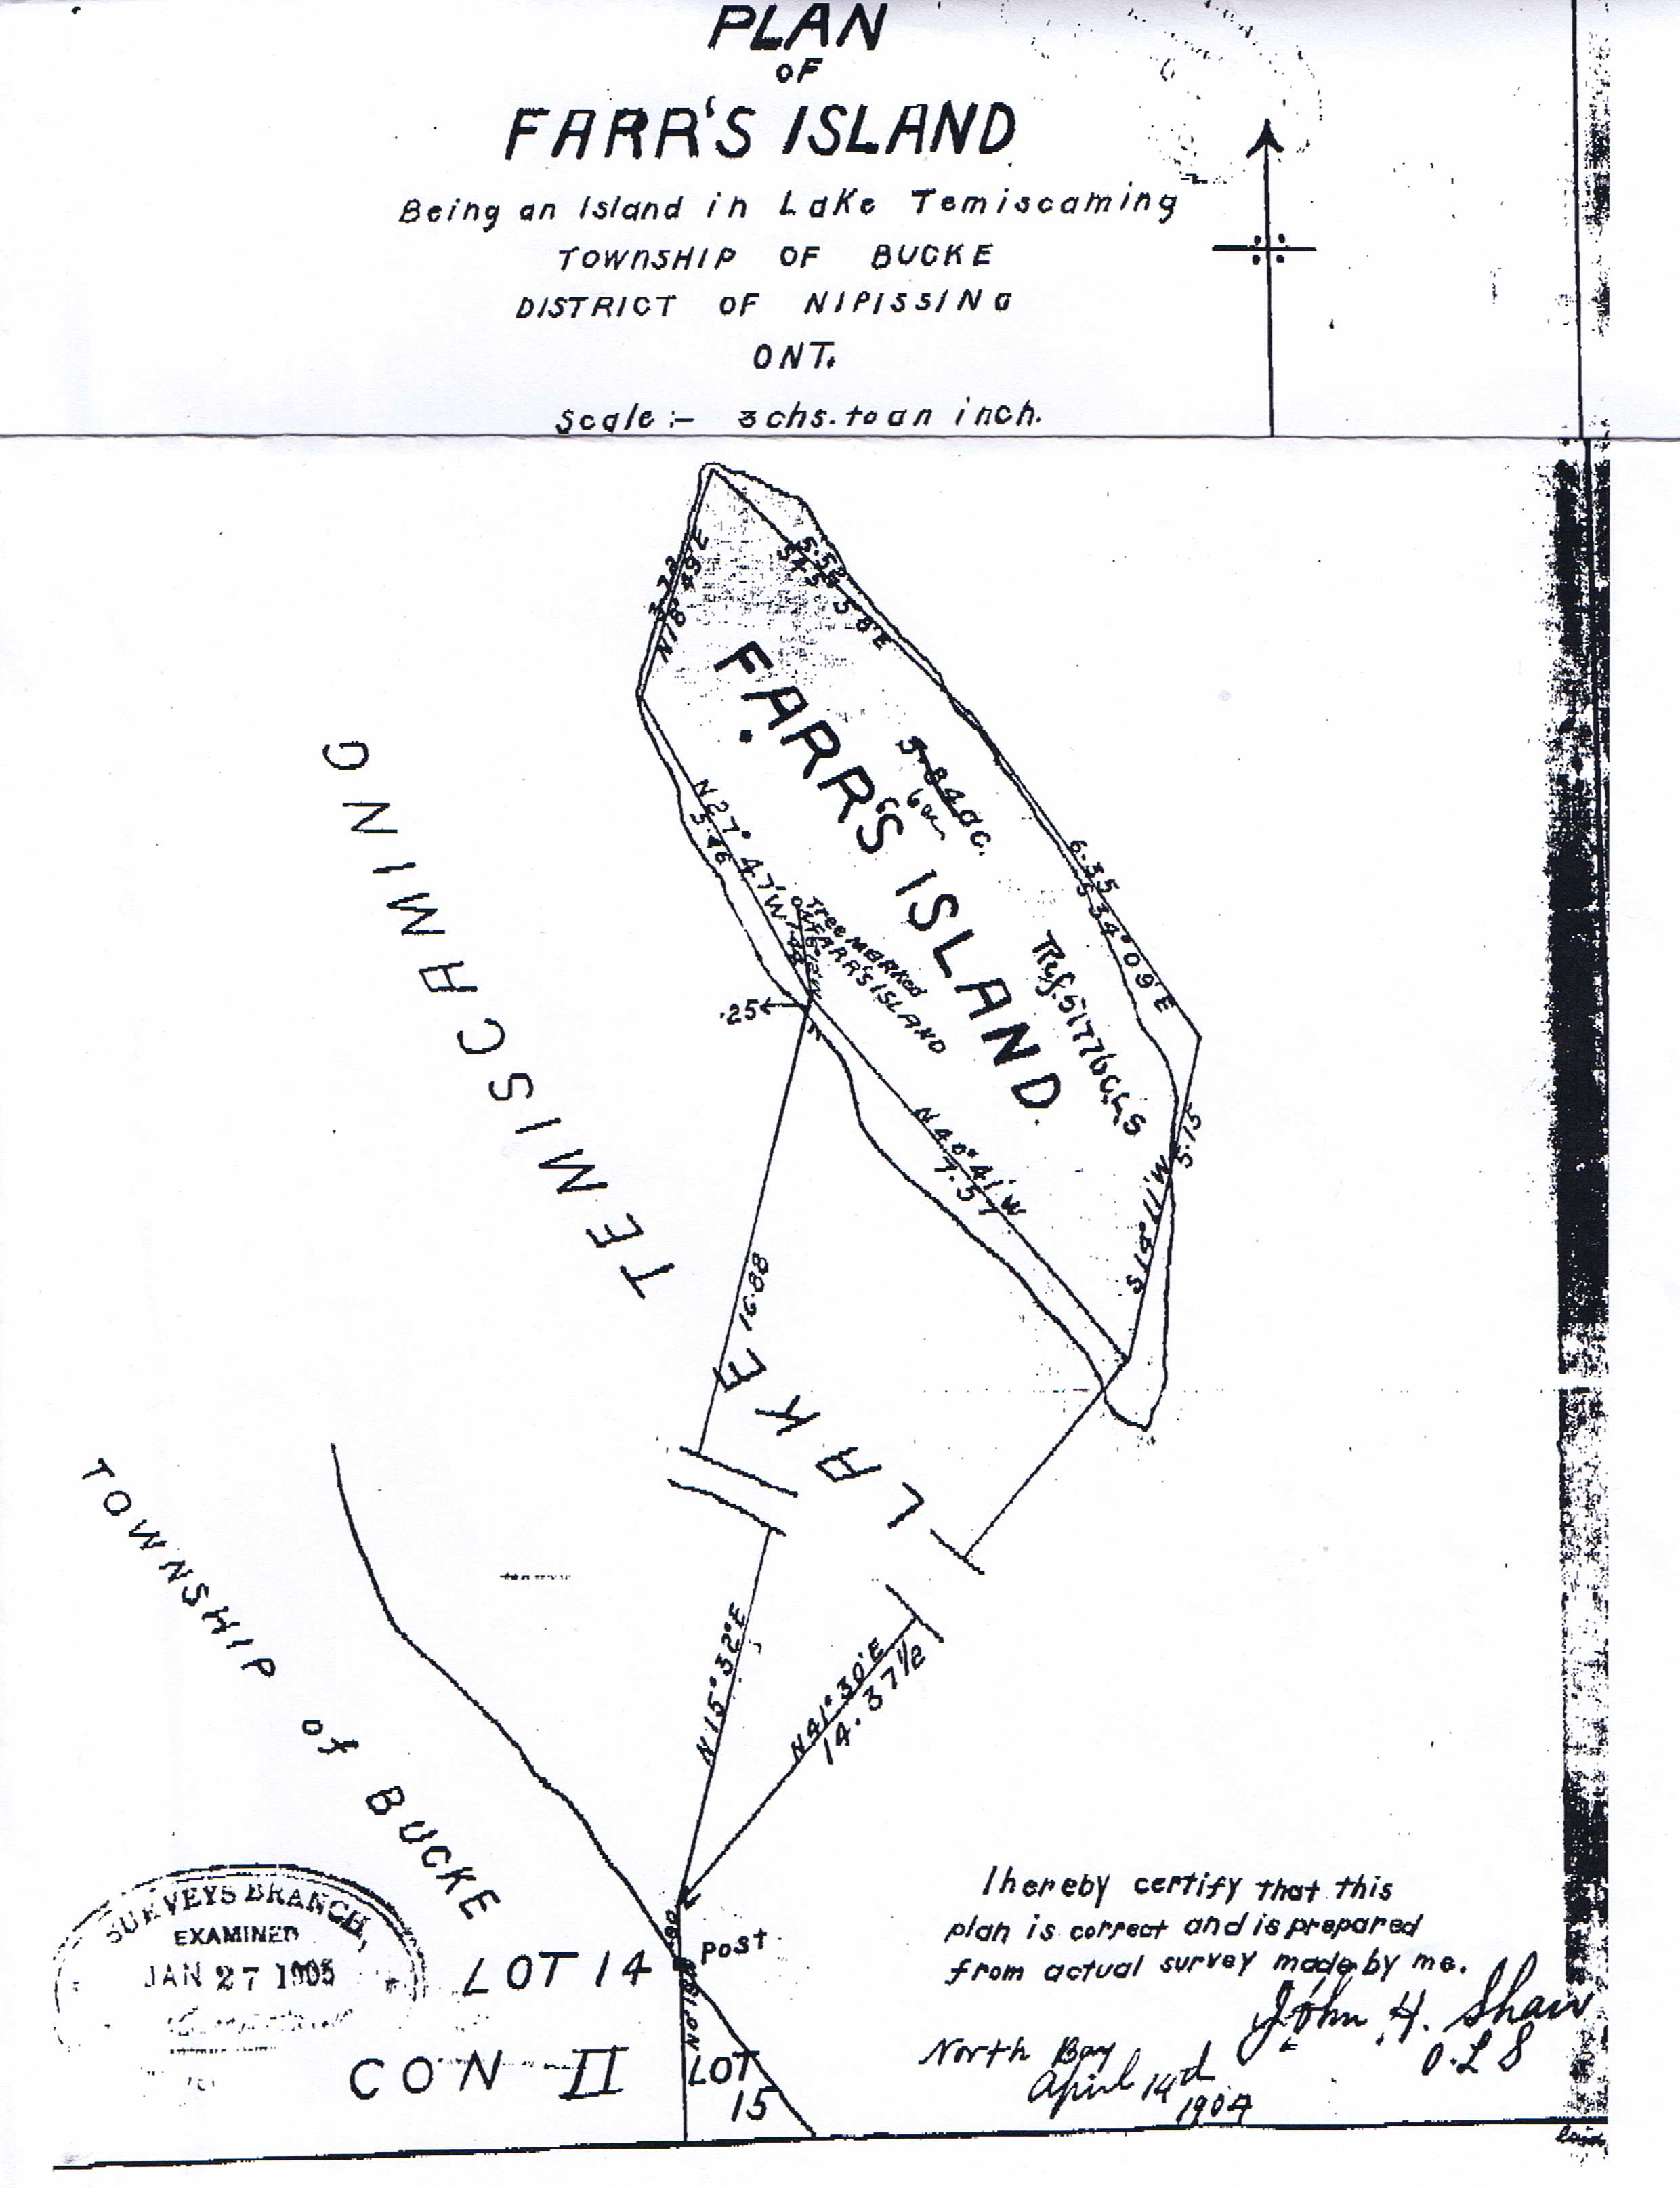 Plan of Farr Island - original survey don in April of 1904 by John Shaw. Survey was done on the ice and was probably done in anticipation of the purchase by the Farr Family. / le plan d'arpentage de l'île Farr produit en avril 1904.